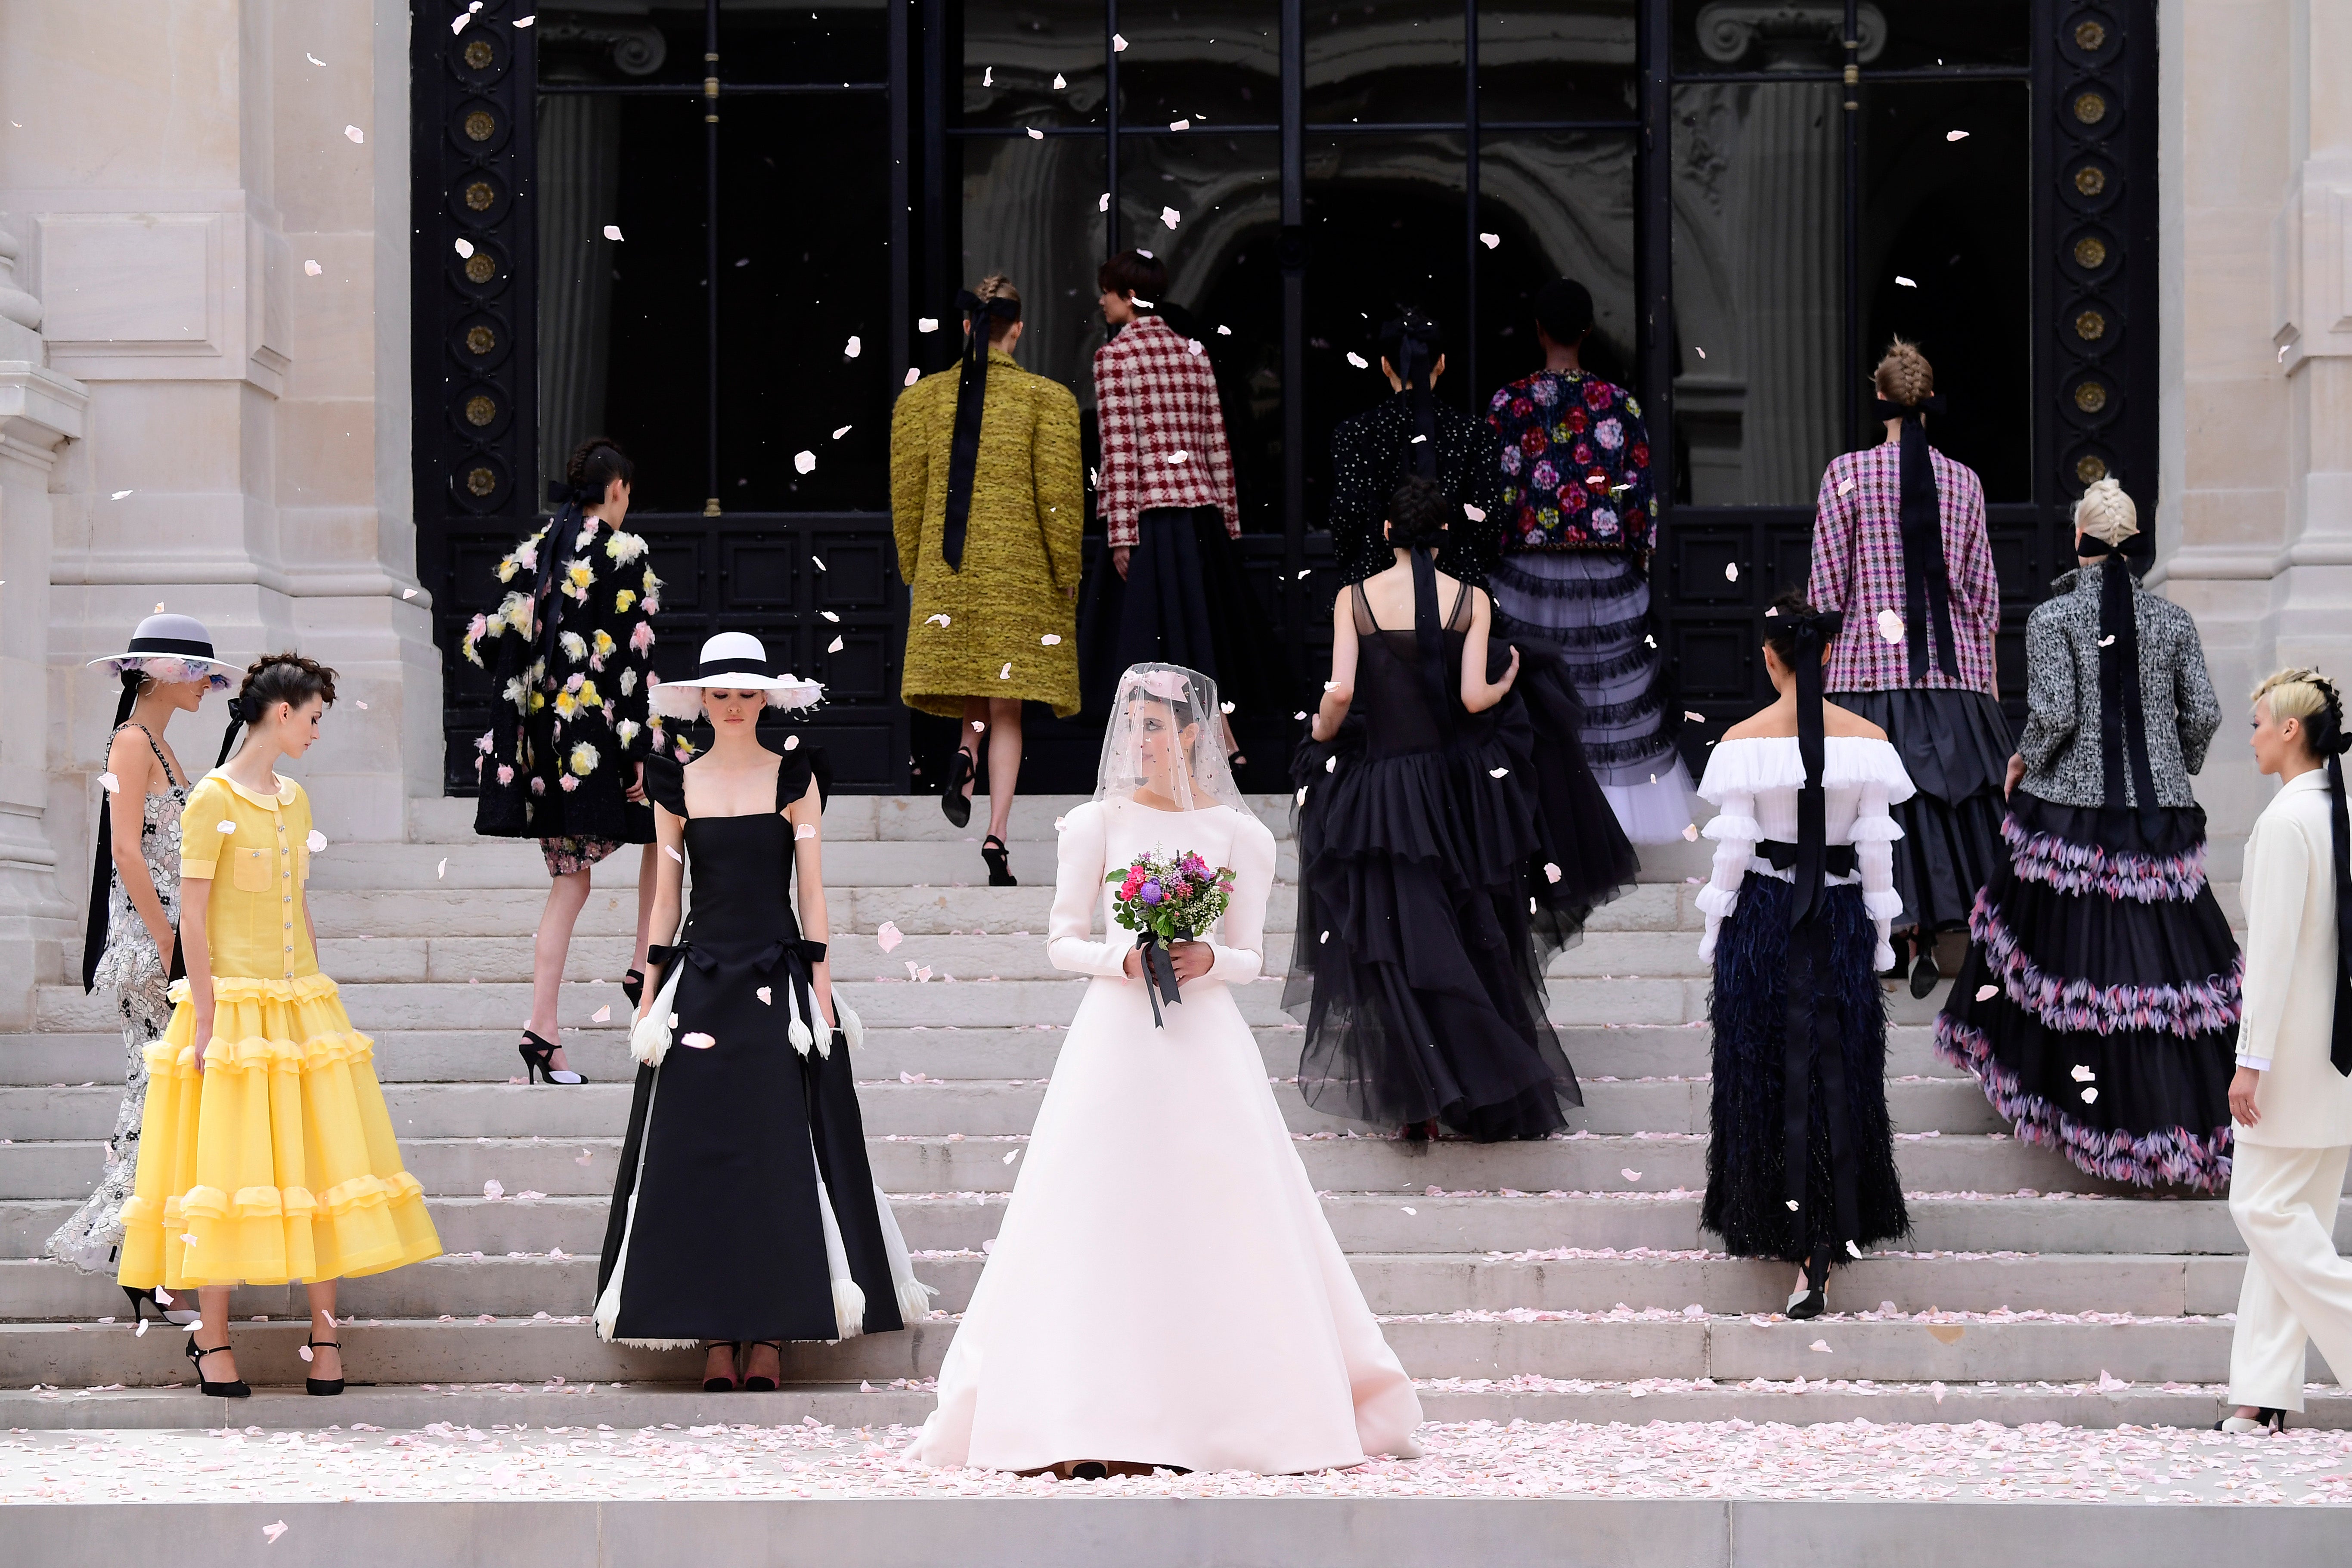 Qualley takes centre-stage in a wedding dress during Chanel’s haute couture autumn/winter 2021/2022 show at Paris Fashion Week